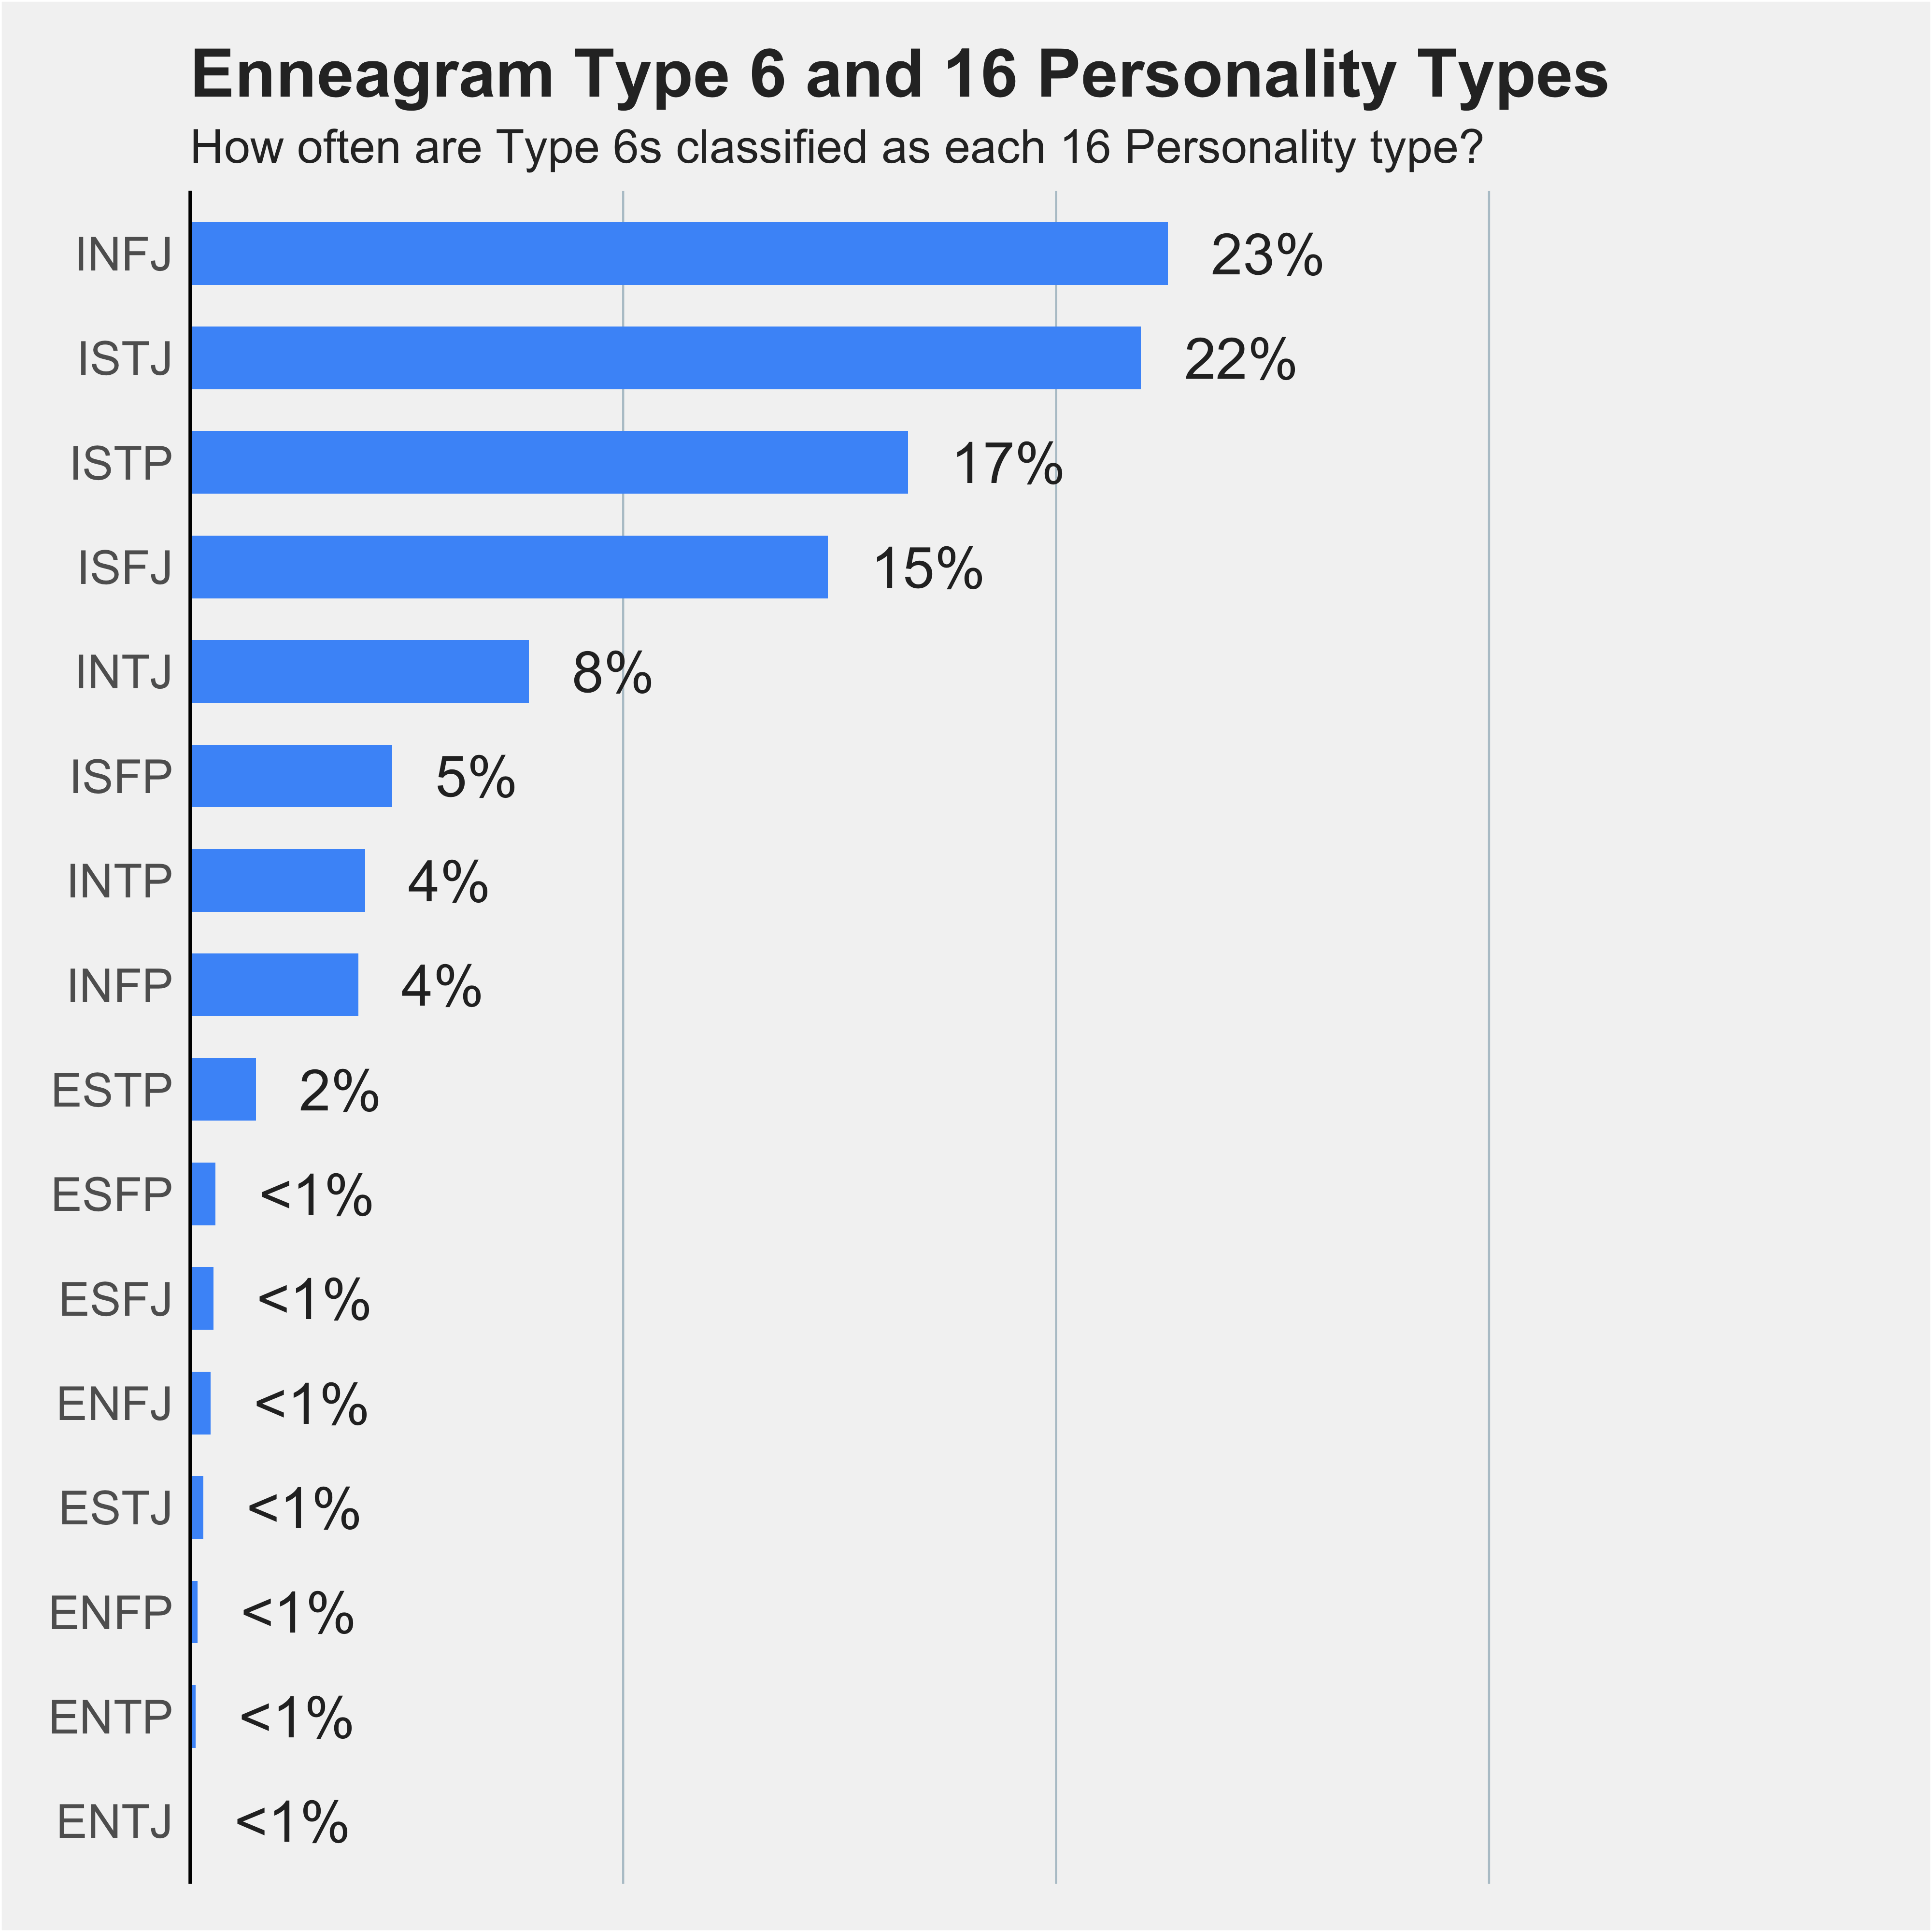 Chart of Type 6s percentages across 16 Personality types 